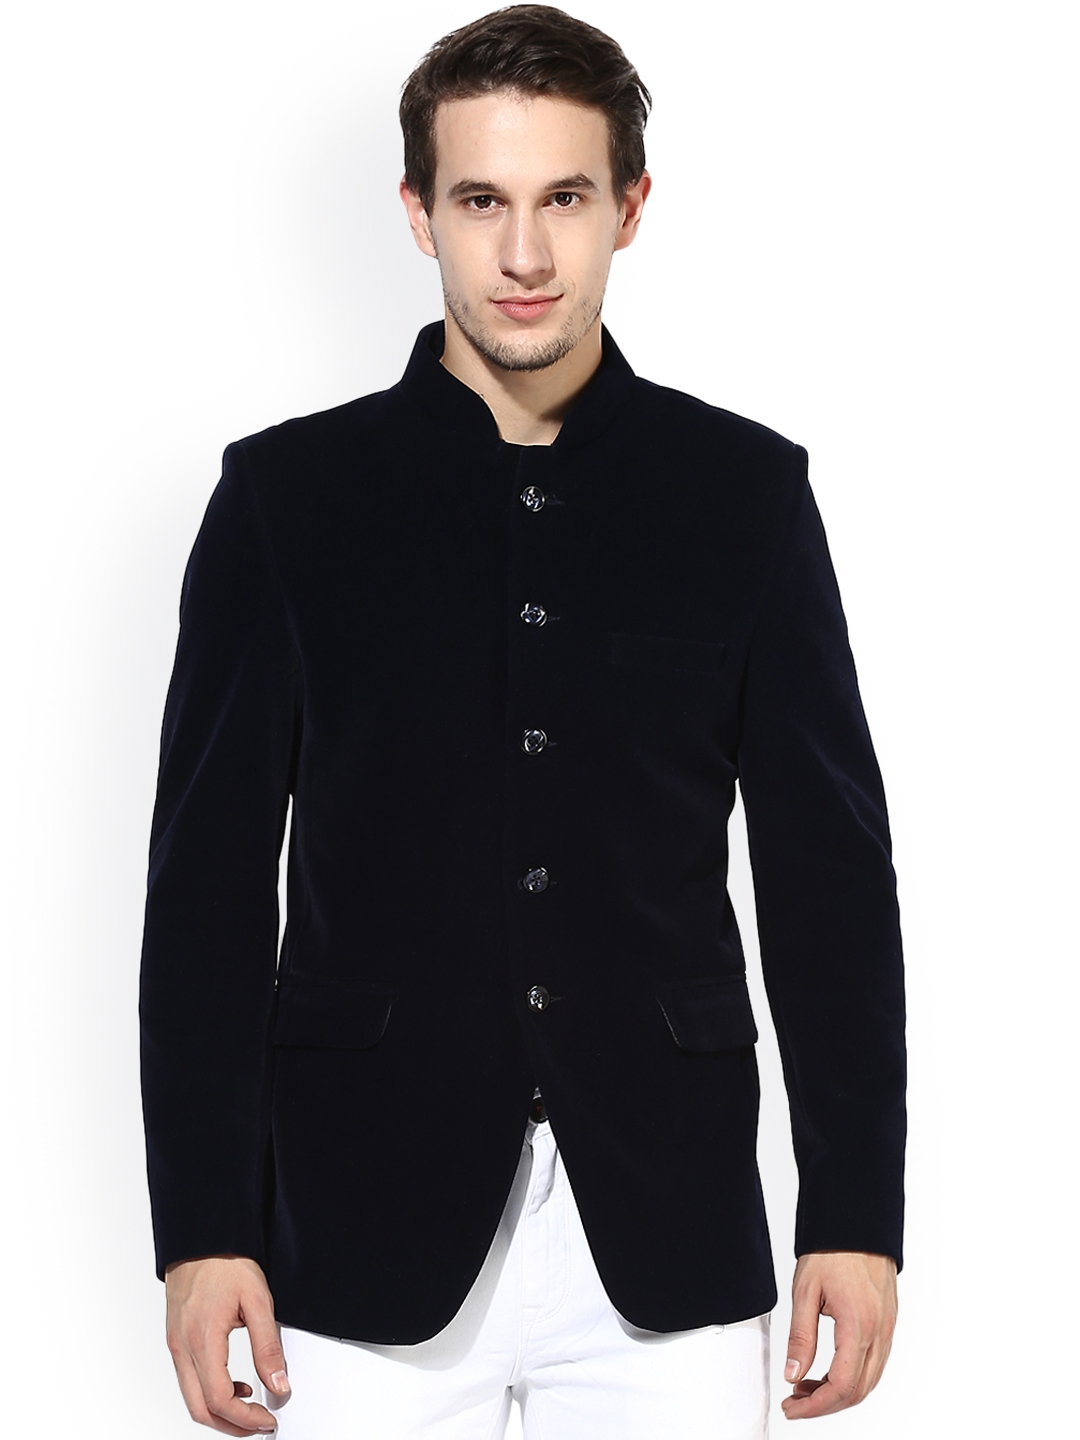 For 1799/-(70% Off) Men's Blazers for flat 70% off (Brands like Raymond, Park Avenue & more) at Myntra